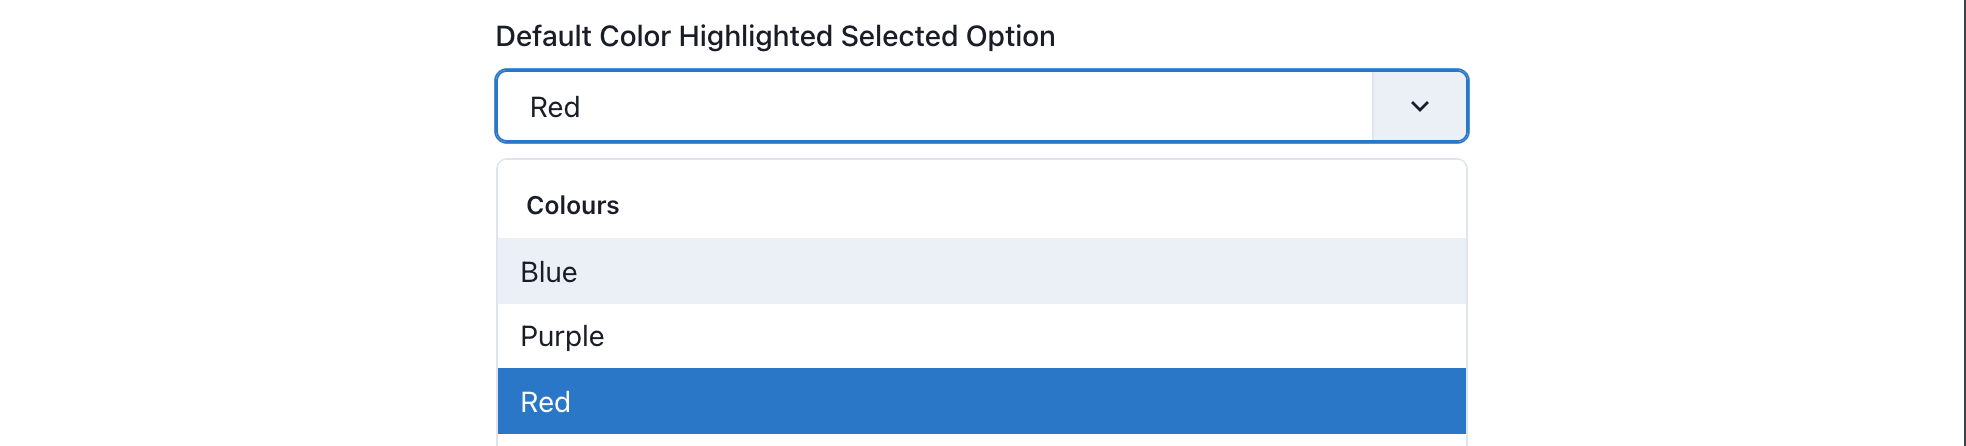 Color Highlighted Selected Option